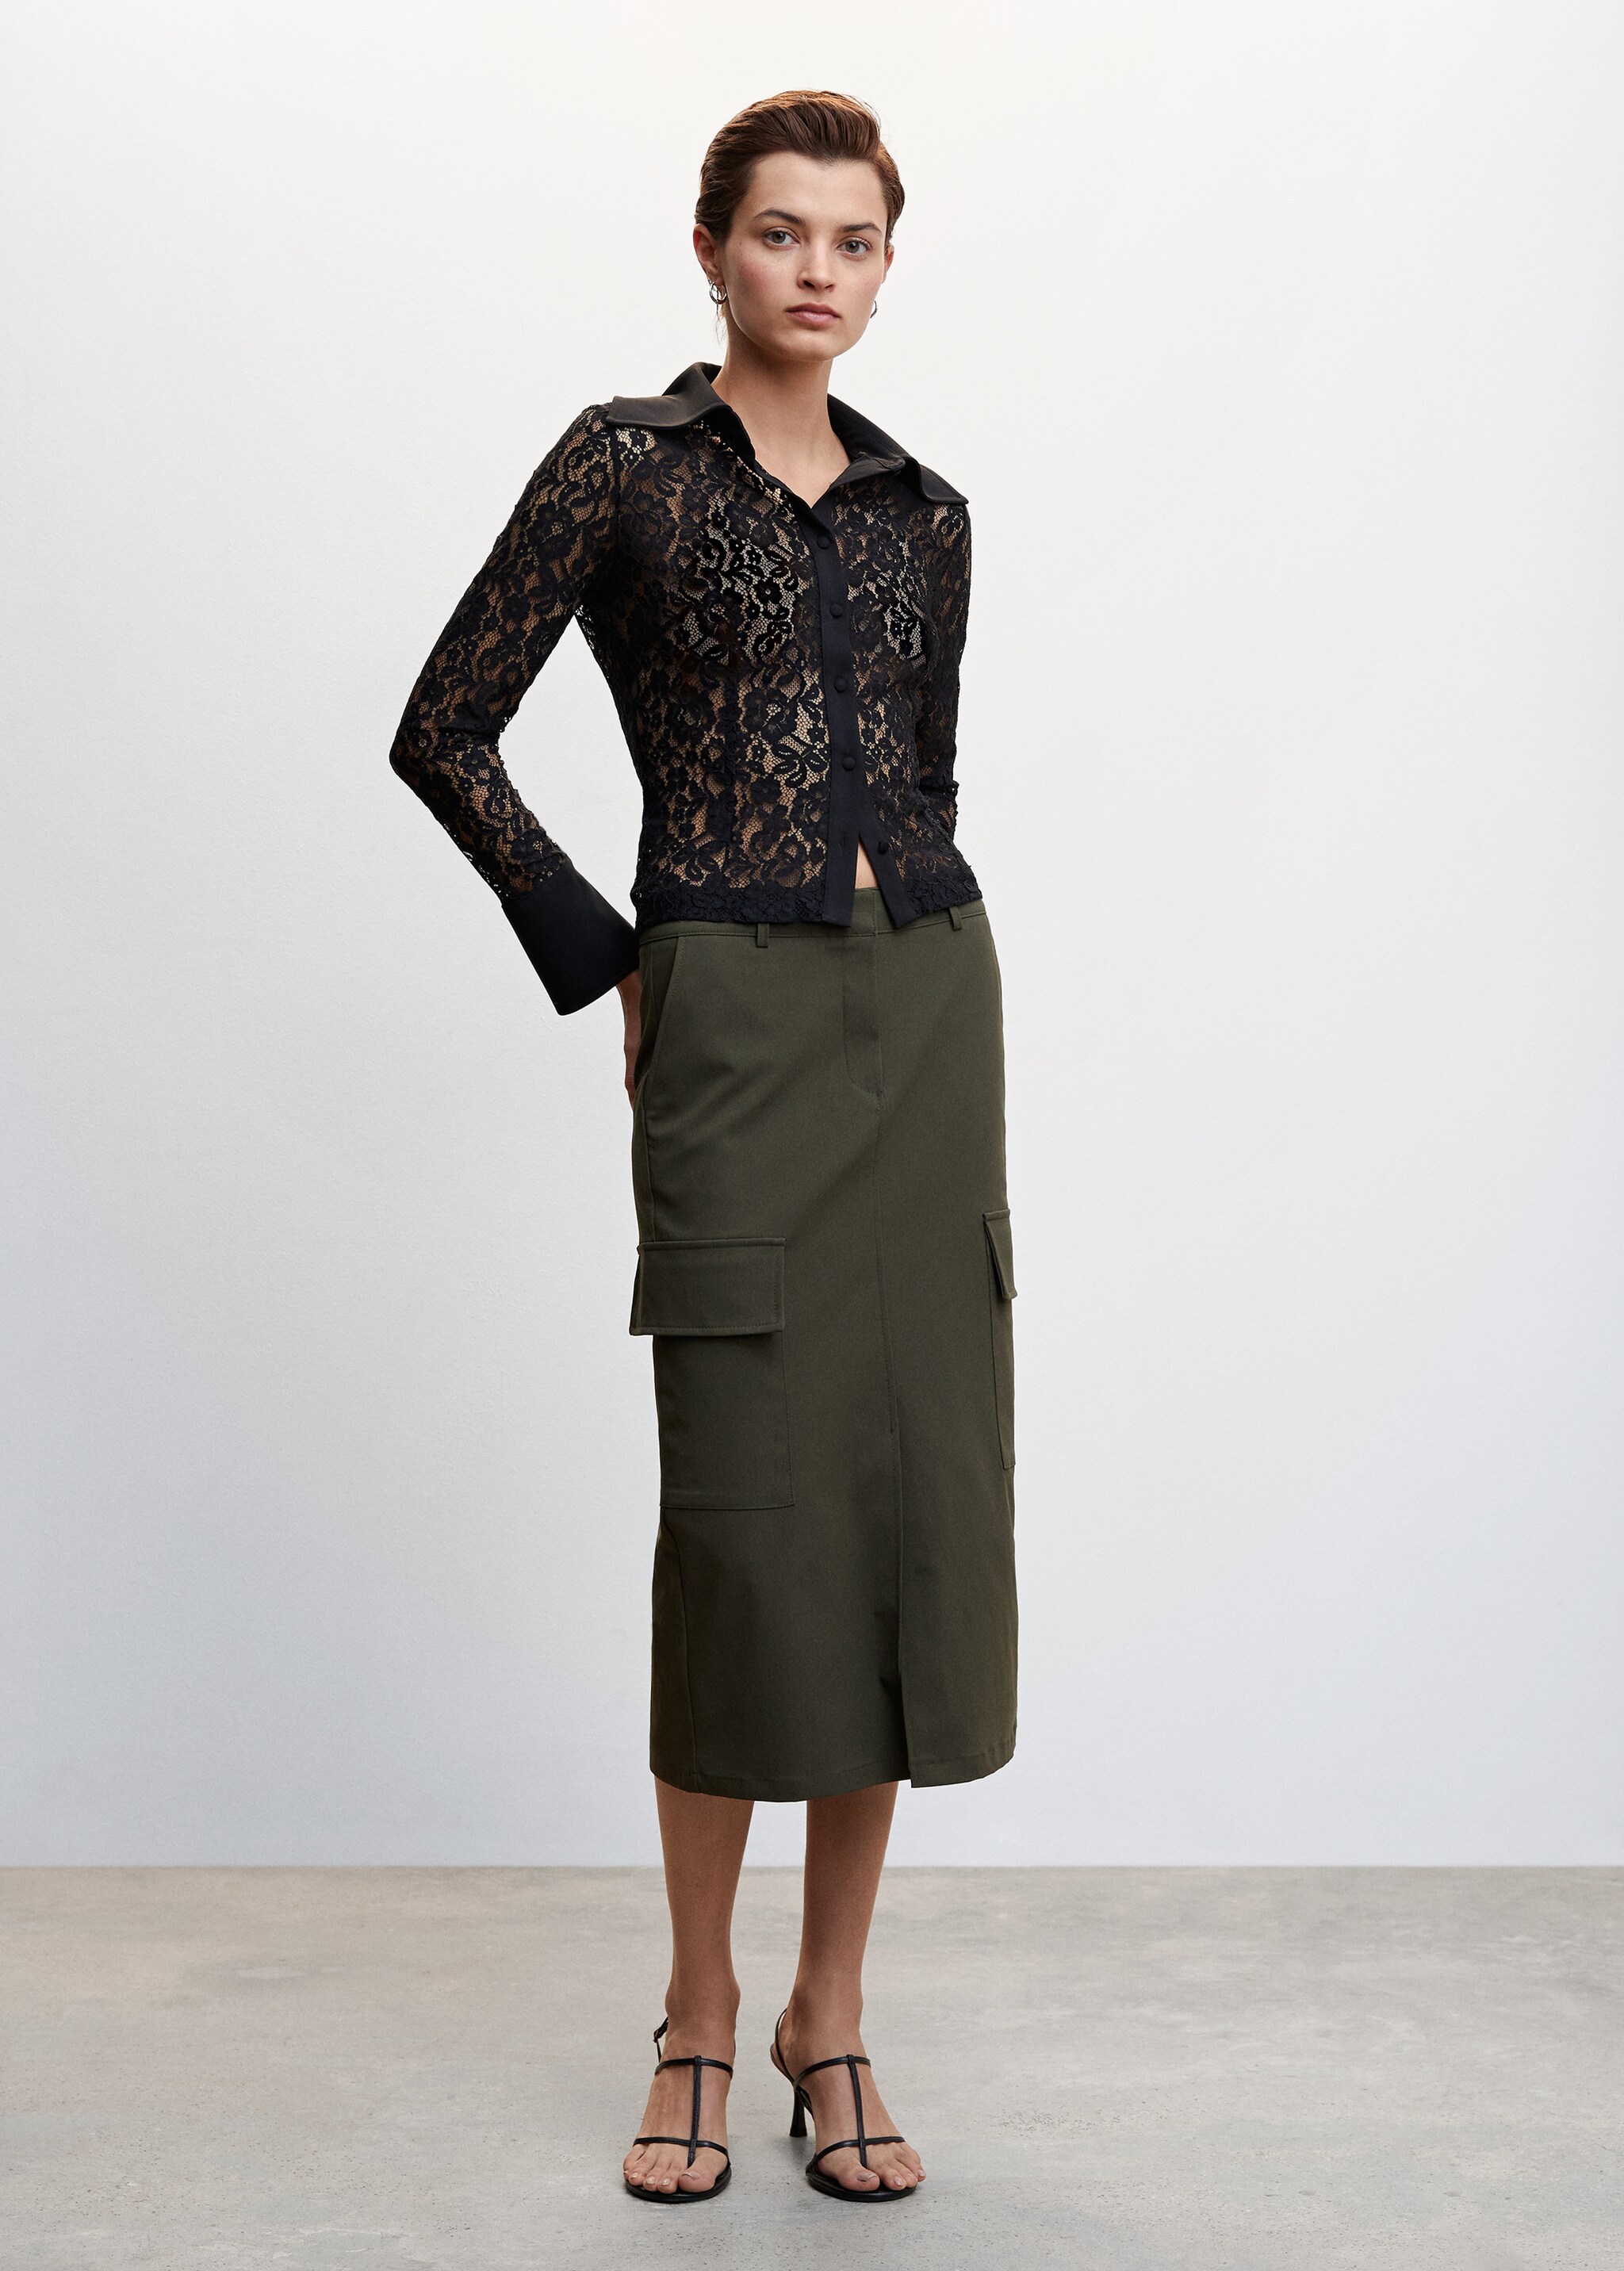 Pencil skirt with pockets - General plane